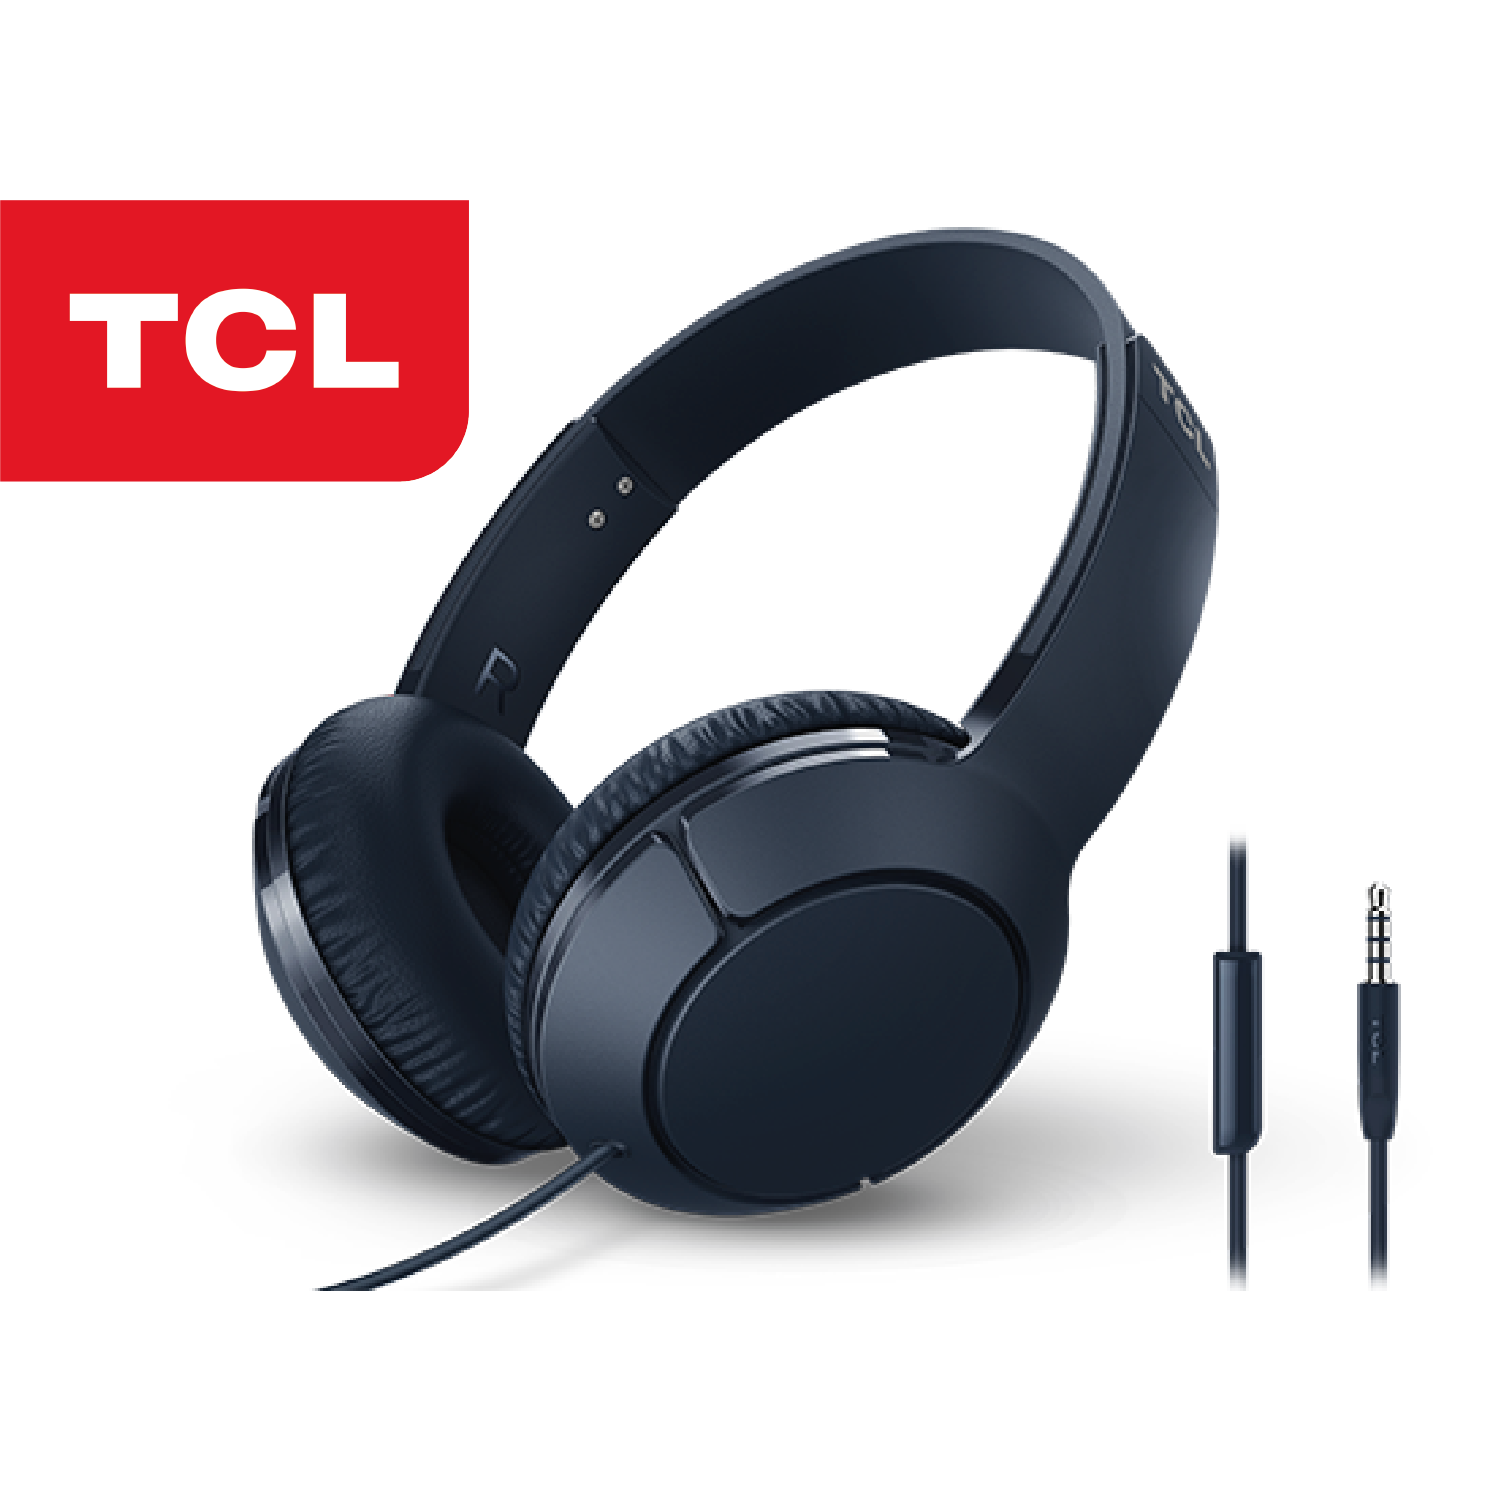 TCL MTRO200 Headset Wired Headphones - Powerful Bass Headband with Built-in Mic